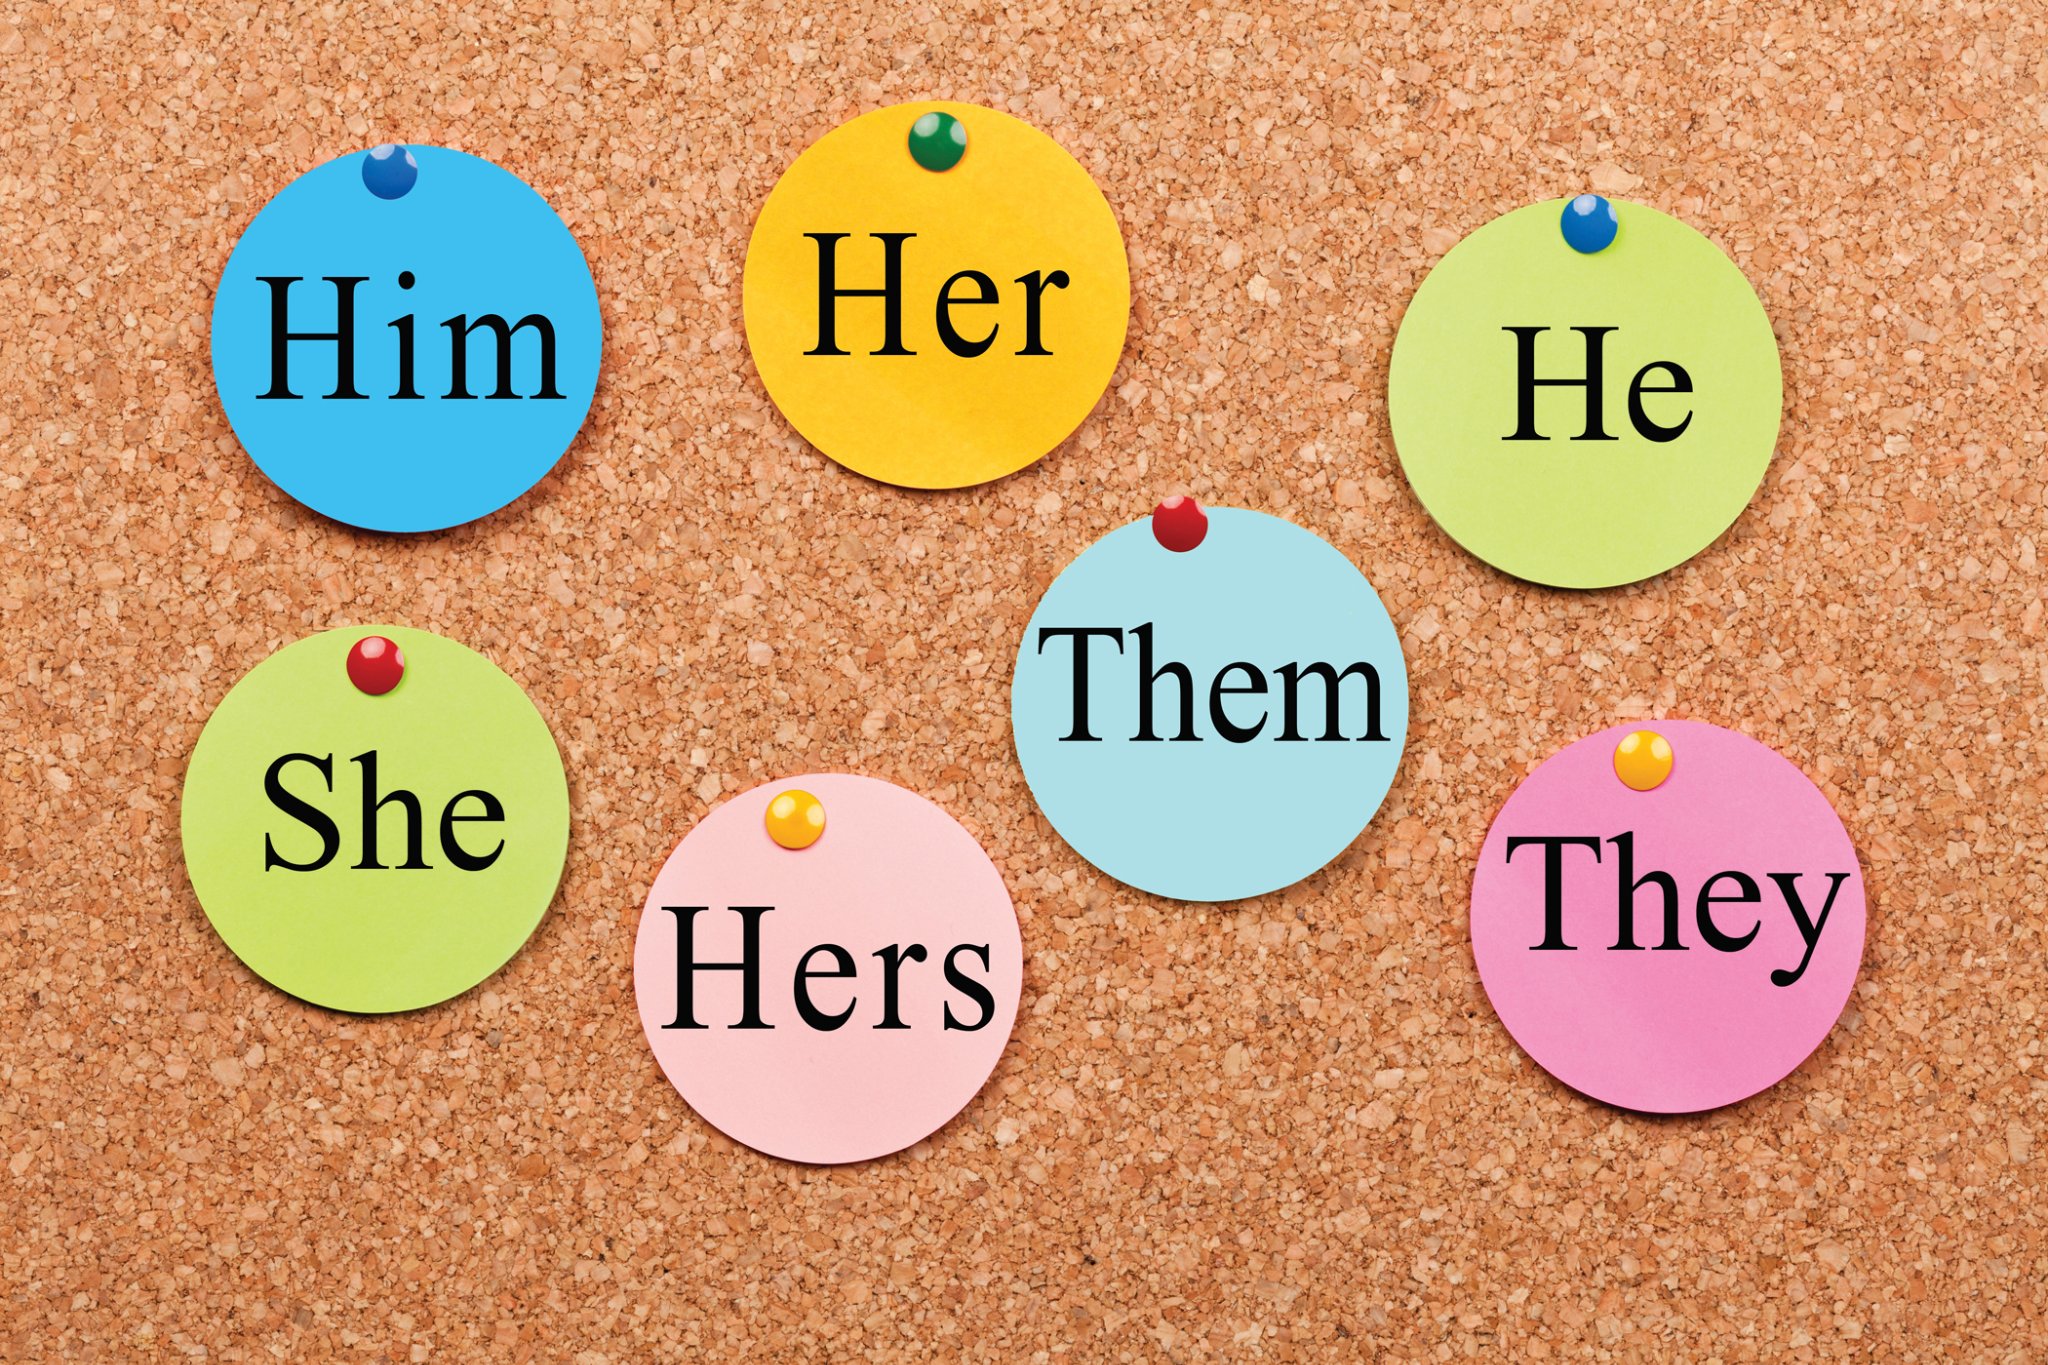 Let’s Get It Right: Using Correct Pronouns and Names | ADL